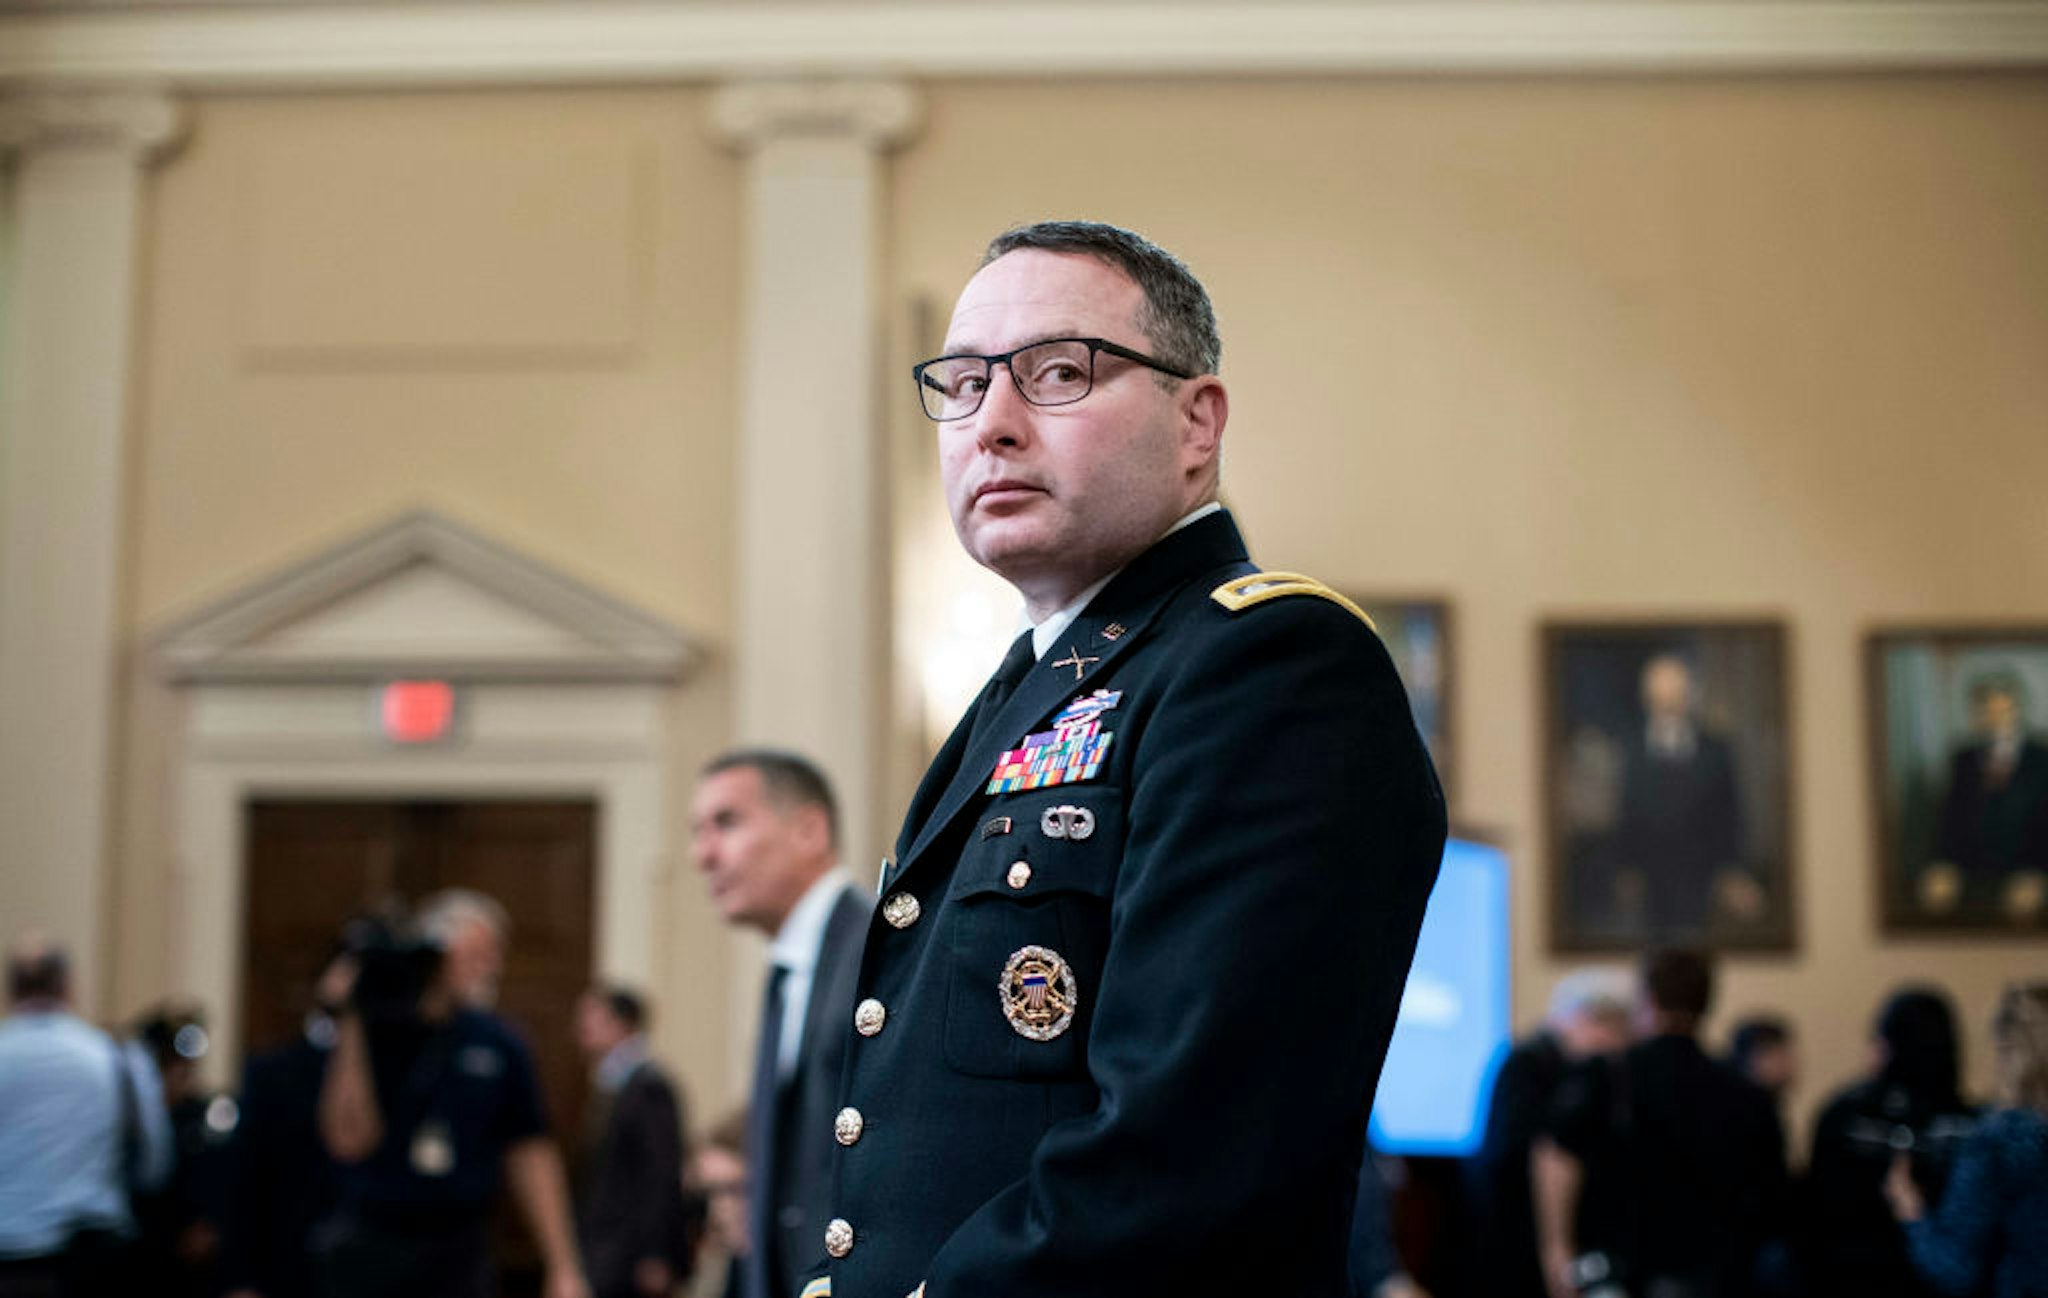 WASHINGTON, DC - NOVEMBER 19: Lt. Col. Alexander Vindman and Jennifer Williams, Special Advisor for Europe and Russia Office of the Vice President, appear before the House Intelligence Committee during the House impeachment inquiry concerning President Donald Trump on Capitol Hill in Washington, DC on Tuesday November 19, 2019. (Photo by Melina Mara/The Washington Post via Getty Images)